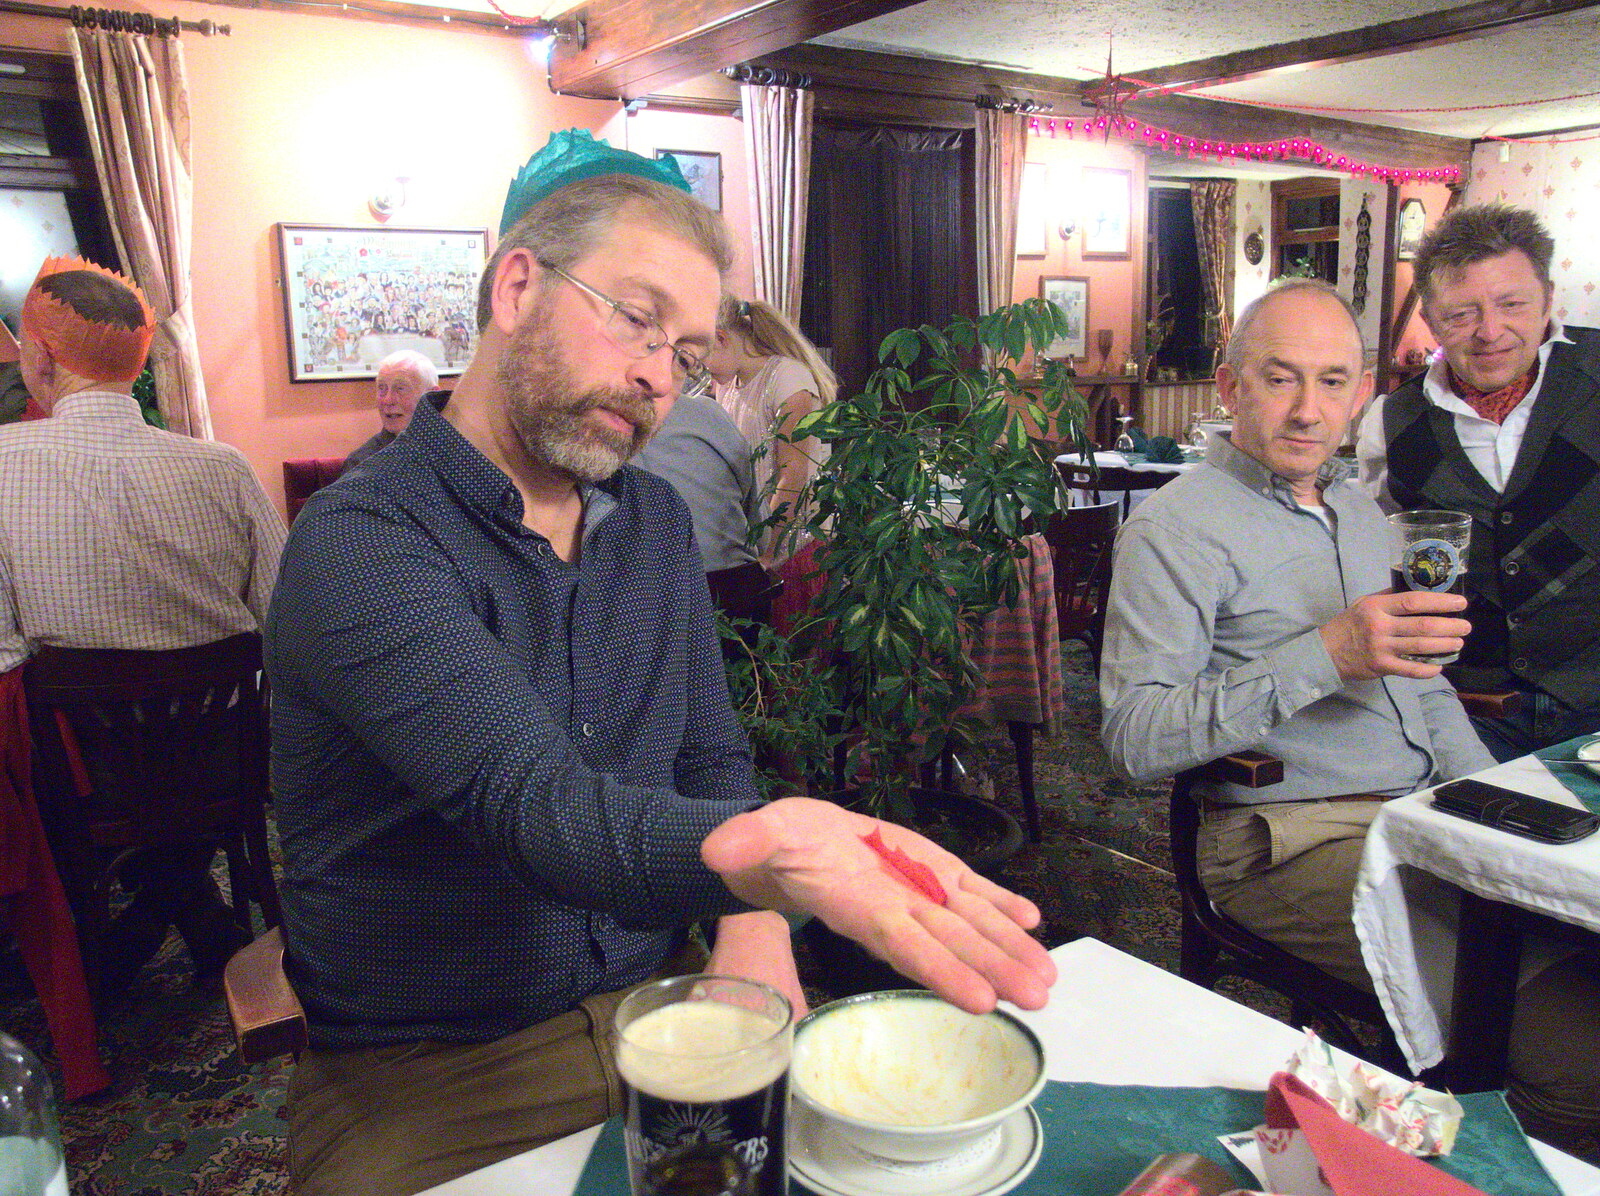 The BSCC Christmas Dinner at The Swann Inn, Brome, Suffolk - 3rd December 2016: Marc does the cracker 'fish' thing